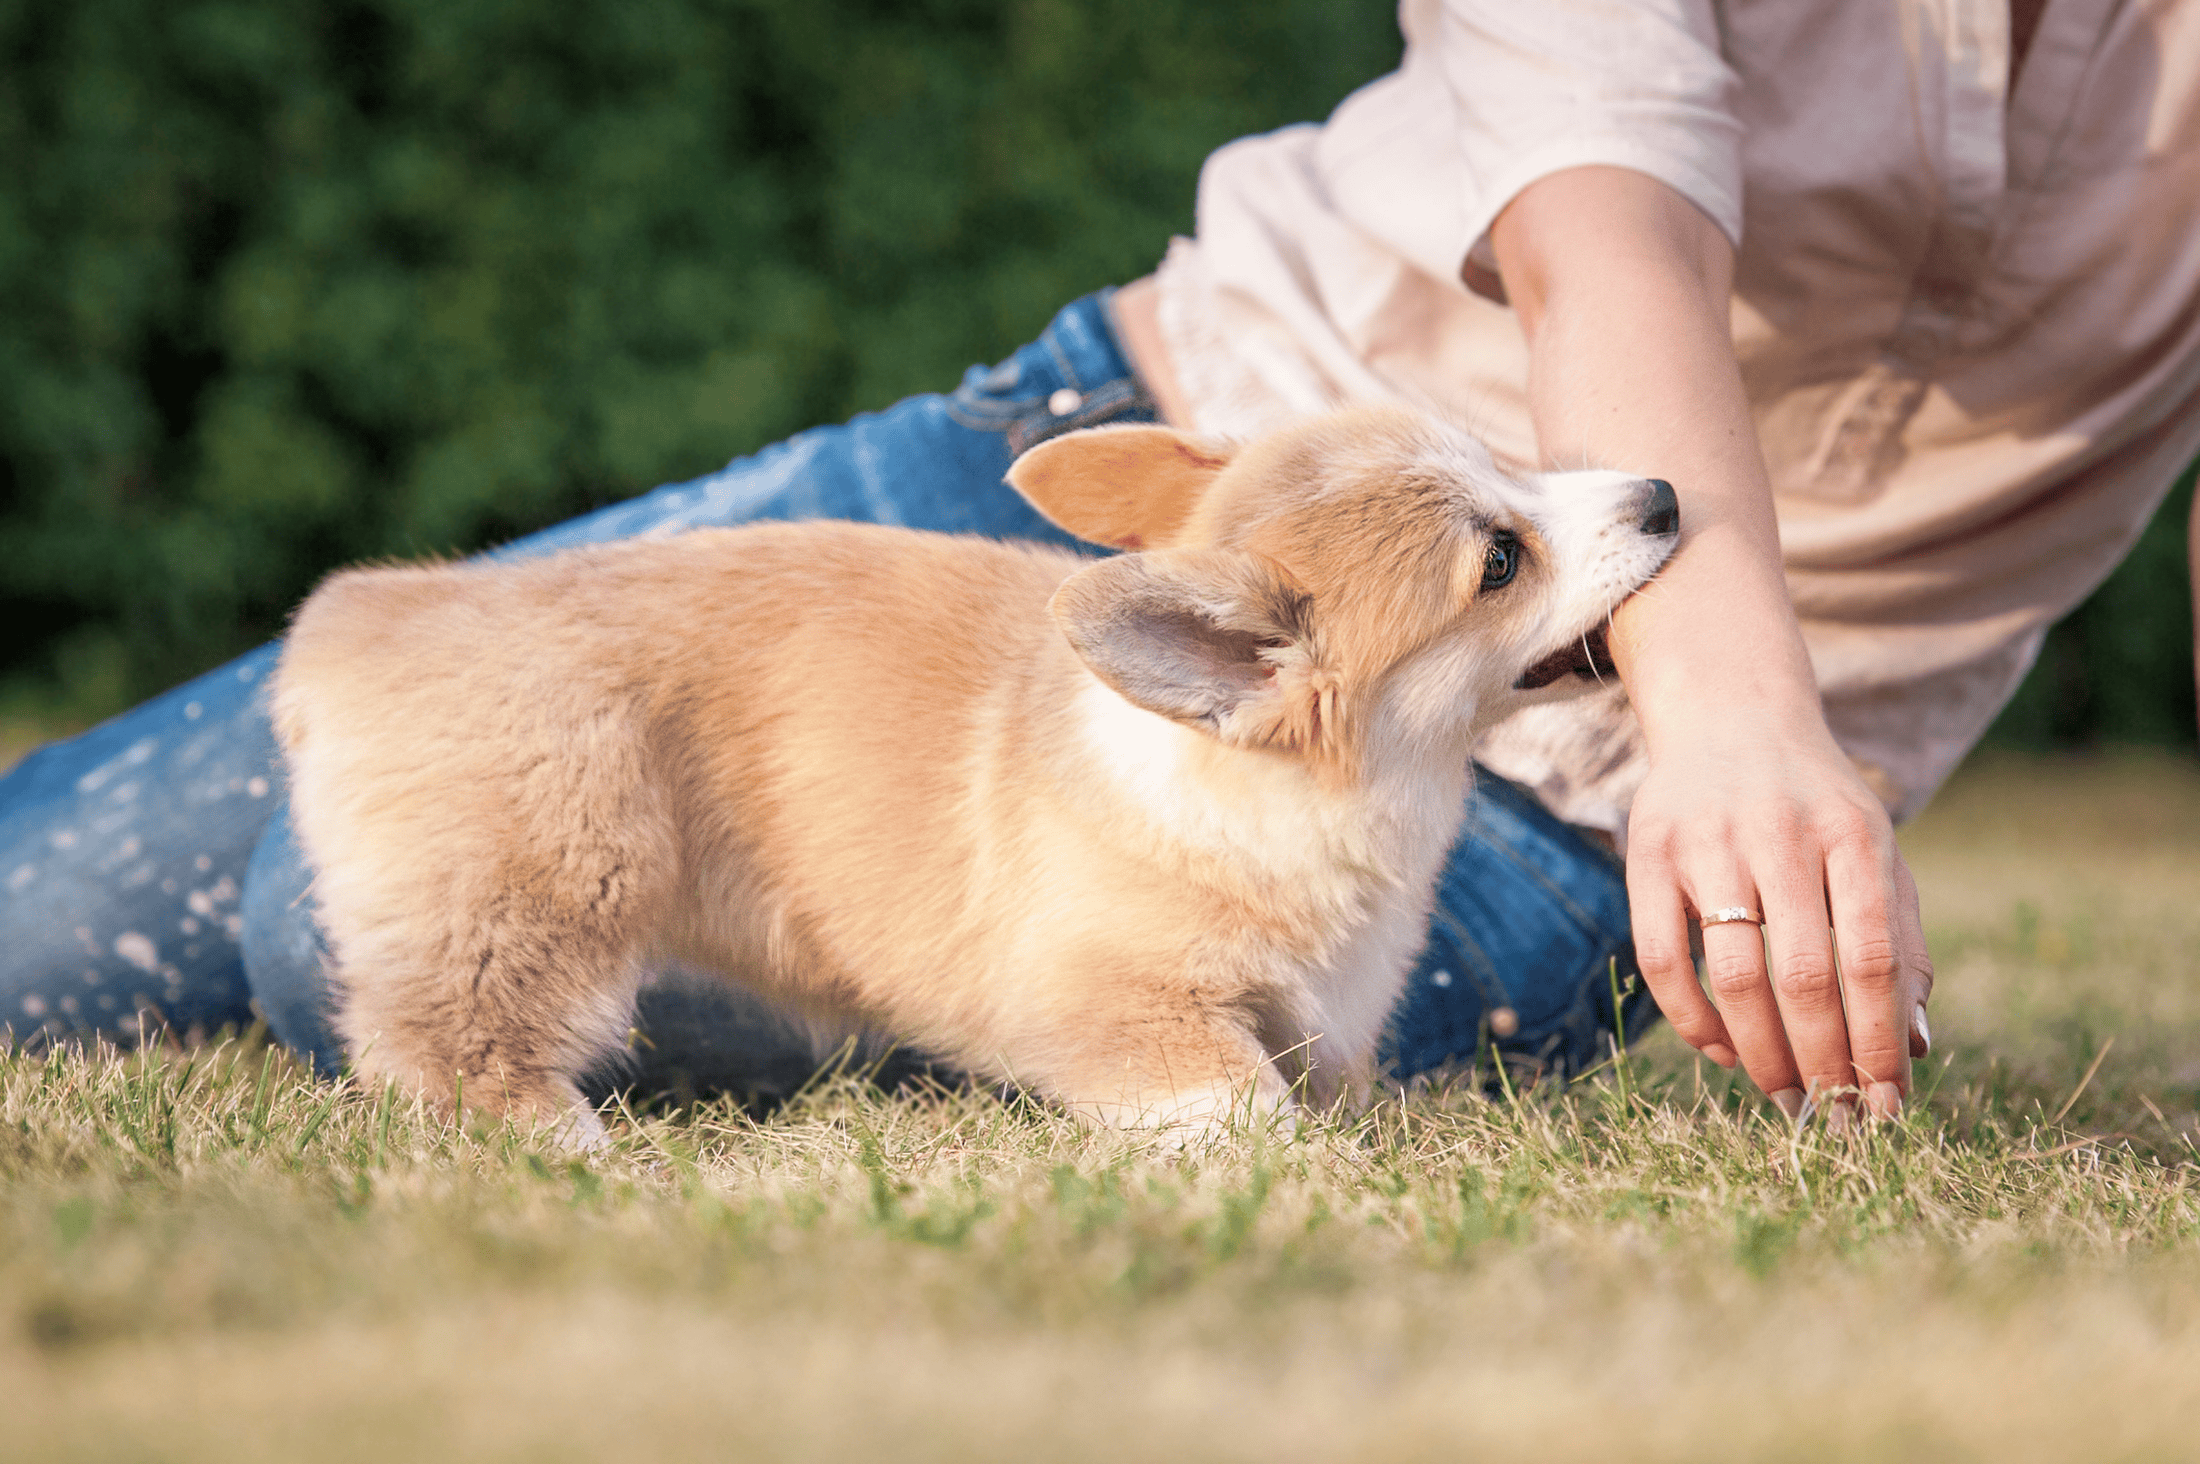 Puppies bite! Teach your puppy to stop puppy biting and protect yourself from puppy bites. Puppies play by puppy mouthing. This may be different than aggressive biting.